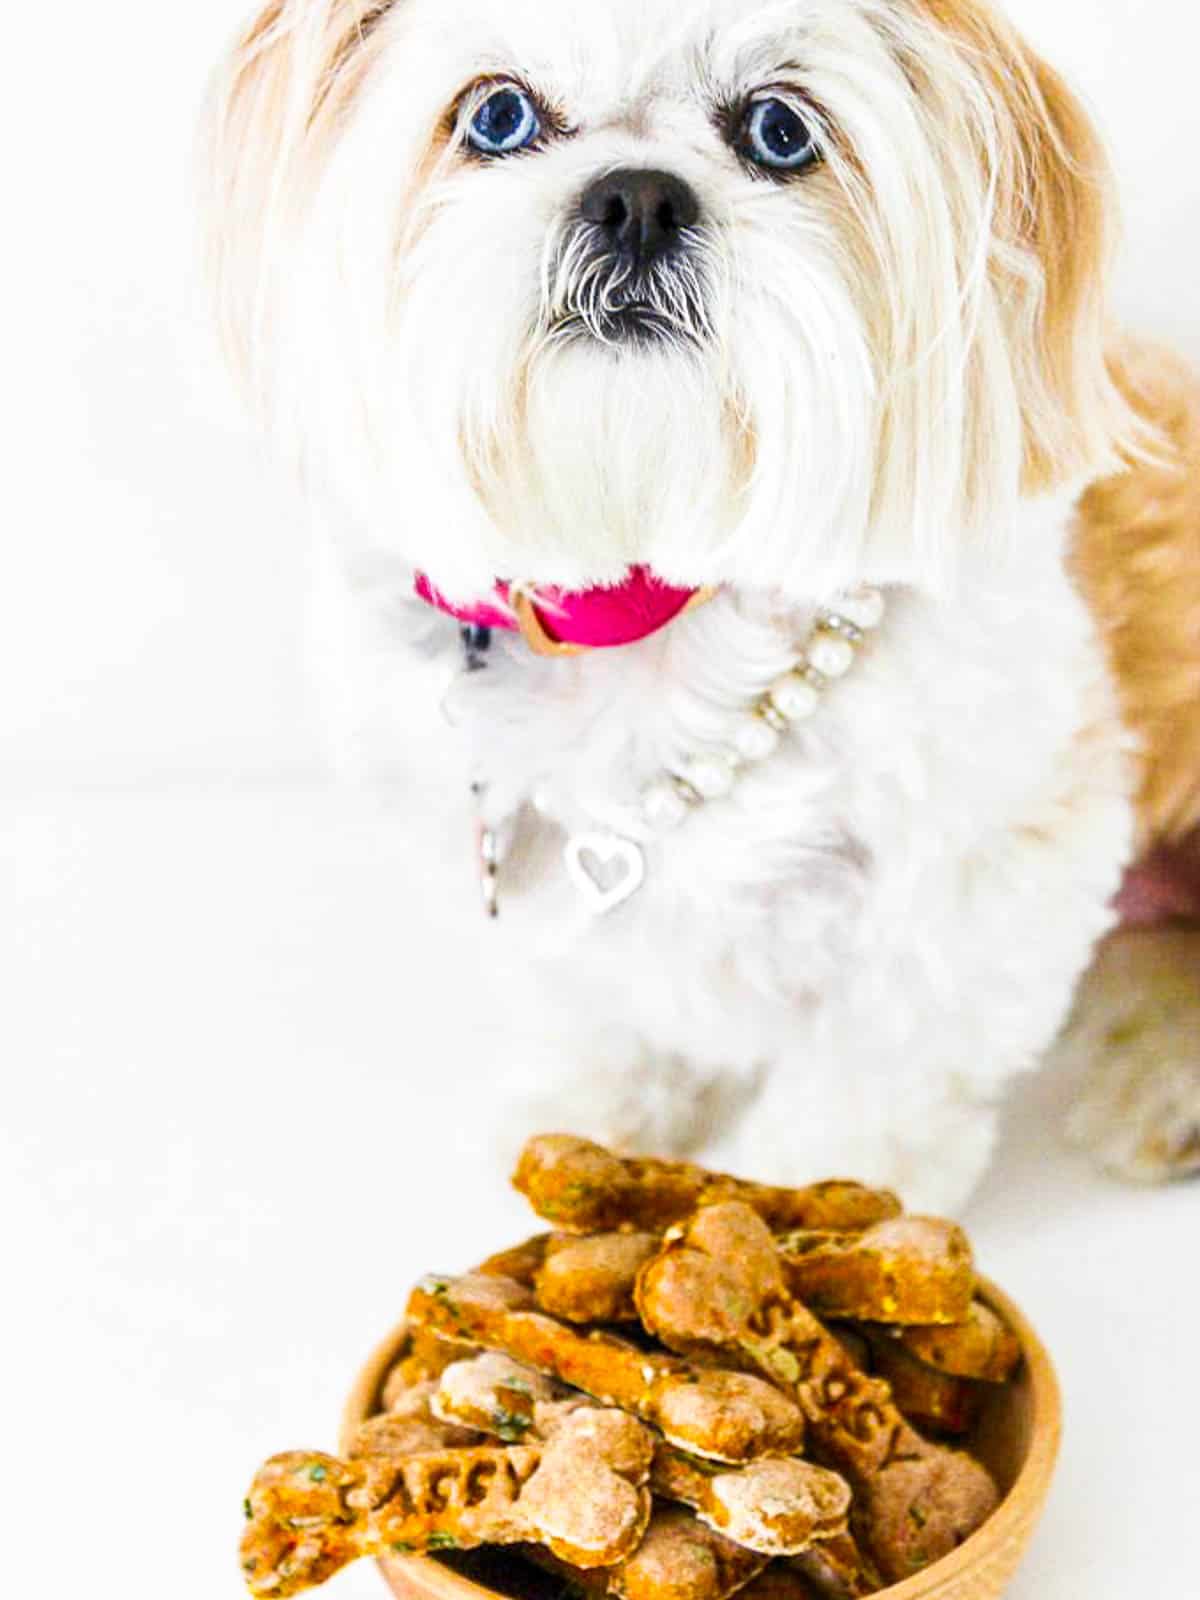 A small white Shih Tzu dog sitting near a wooden bowl of homemade personalized dog biscuits.